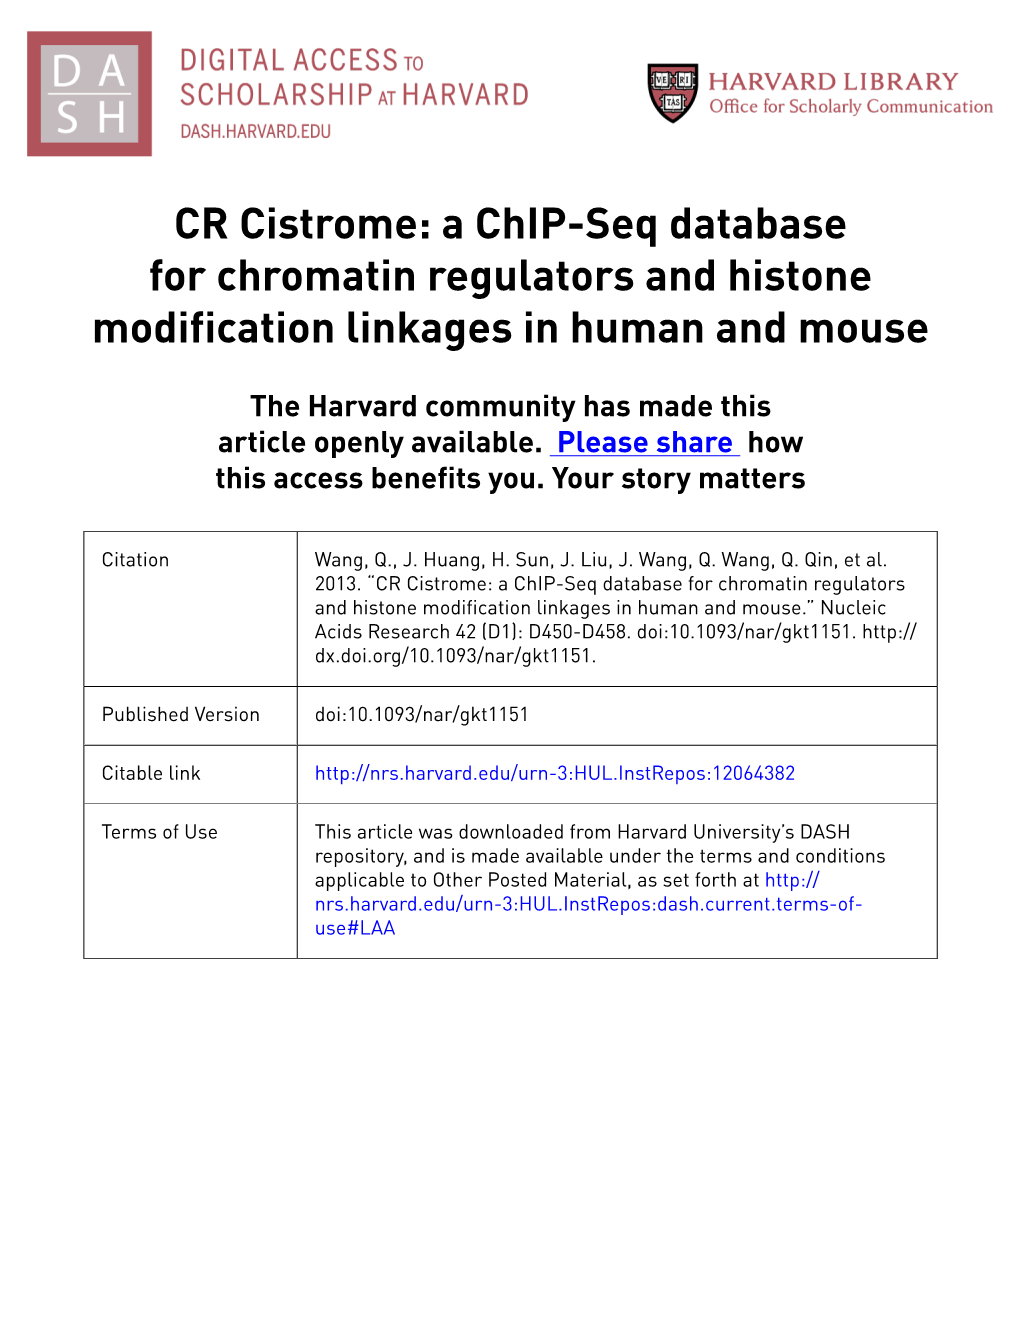 CR Cistrome: a Chip-Seq Database for Chromatin Regulators and Histone Modification Linkages in Human and Mouse